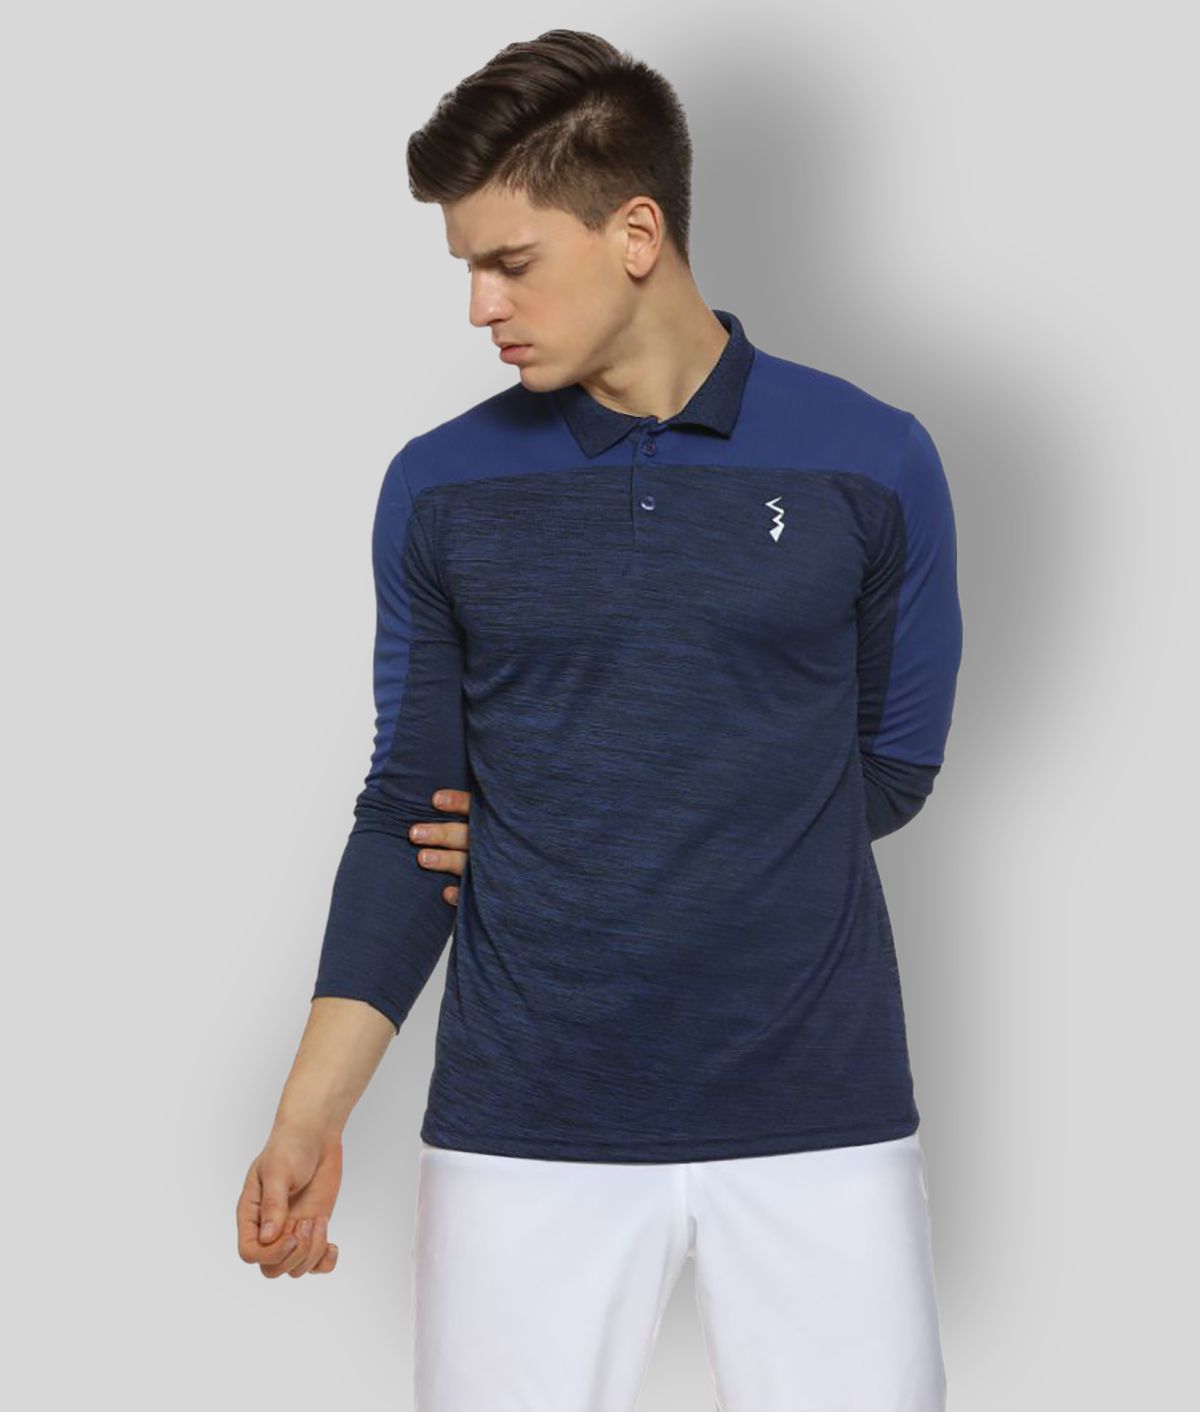     			Campus Sutra - Navy Blue Polyester Regular Fit Men's Sports Polo T-Shirt ( Pack of 1 )